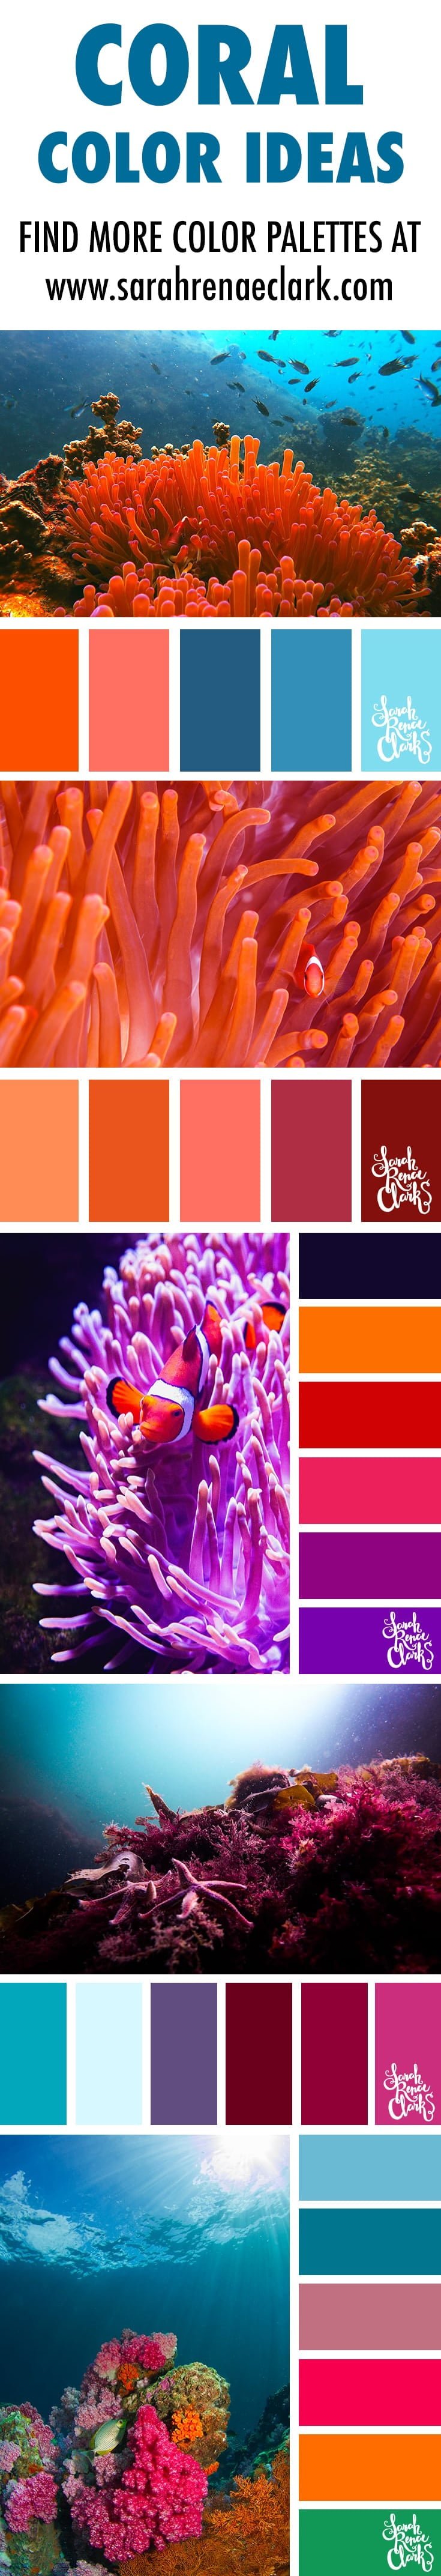 Download 25 Color Palettes Inspired By Ocean Life And Pantone Living Coral